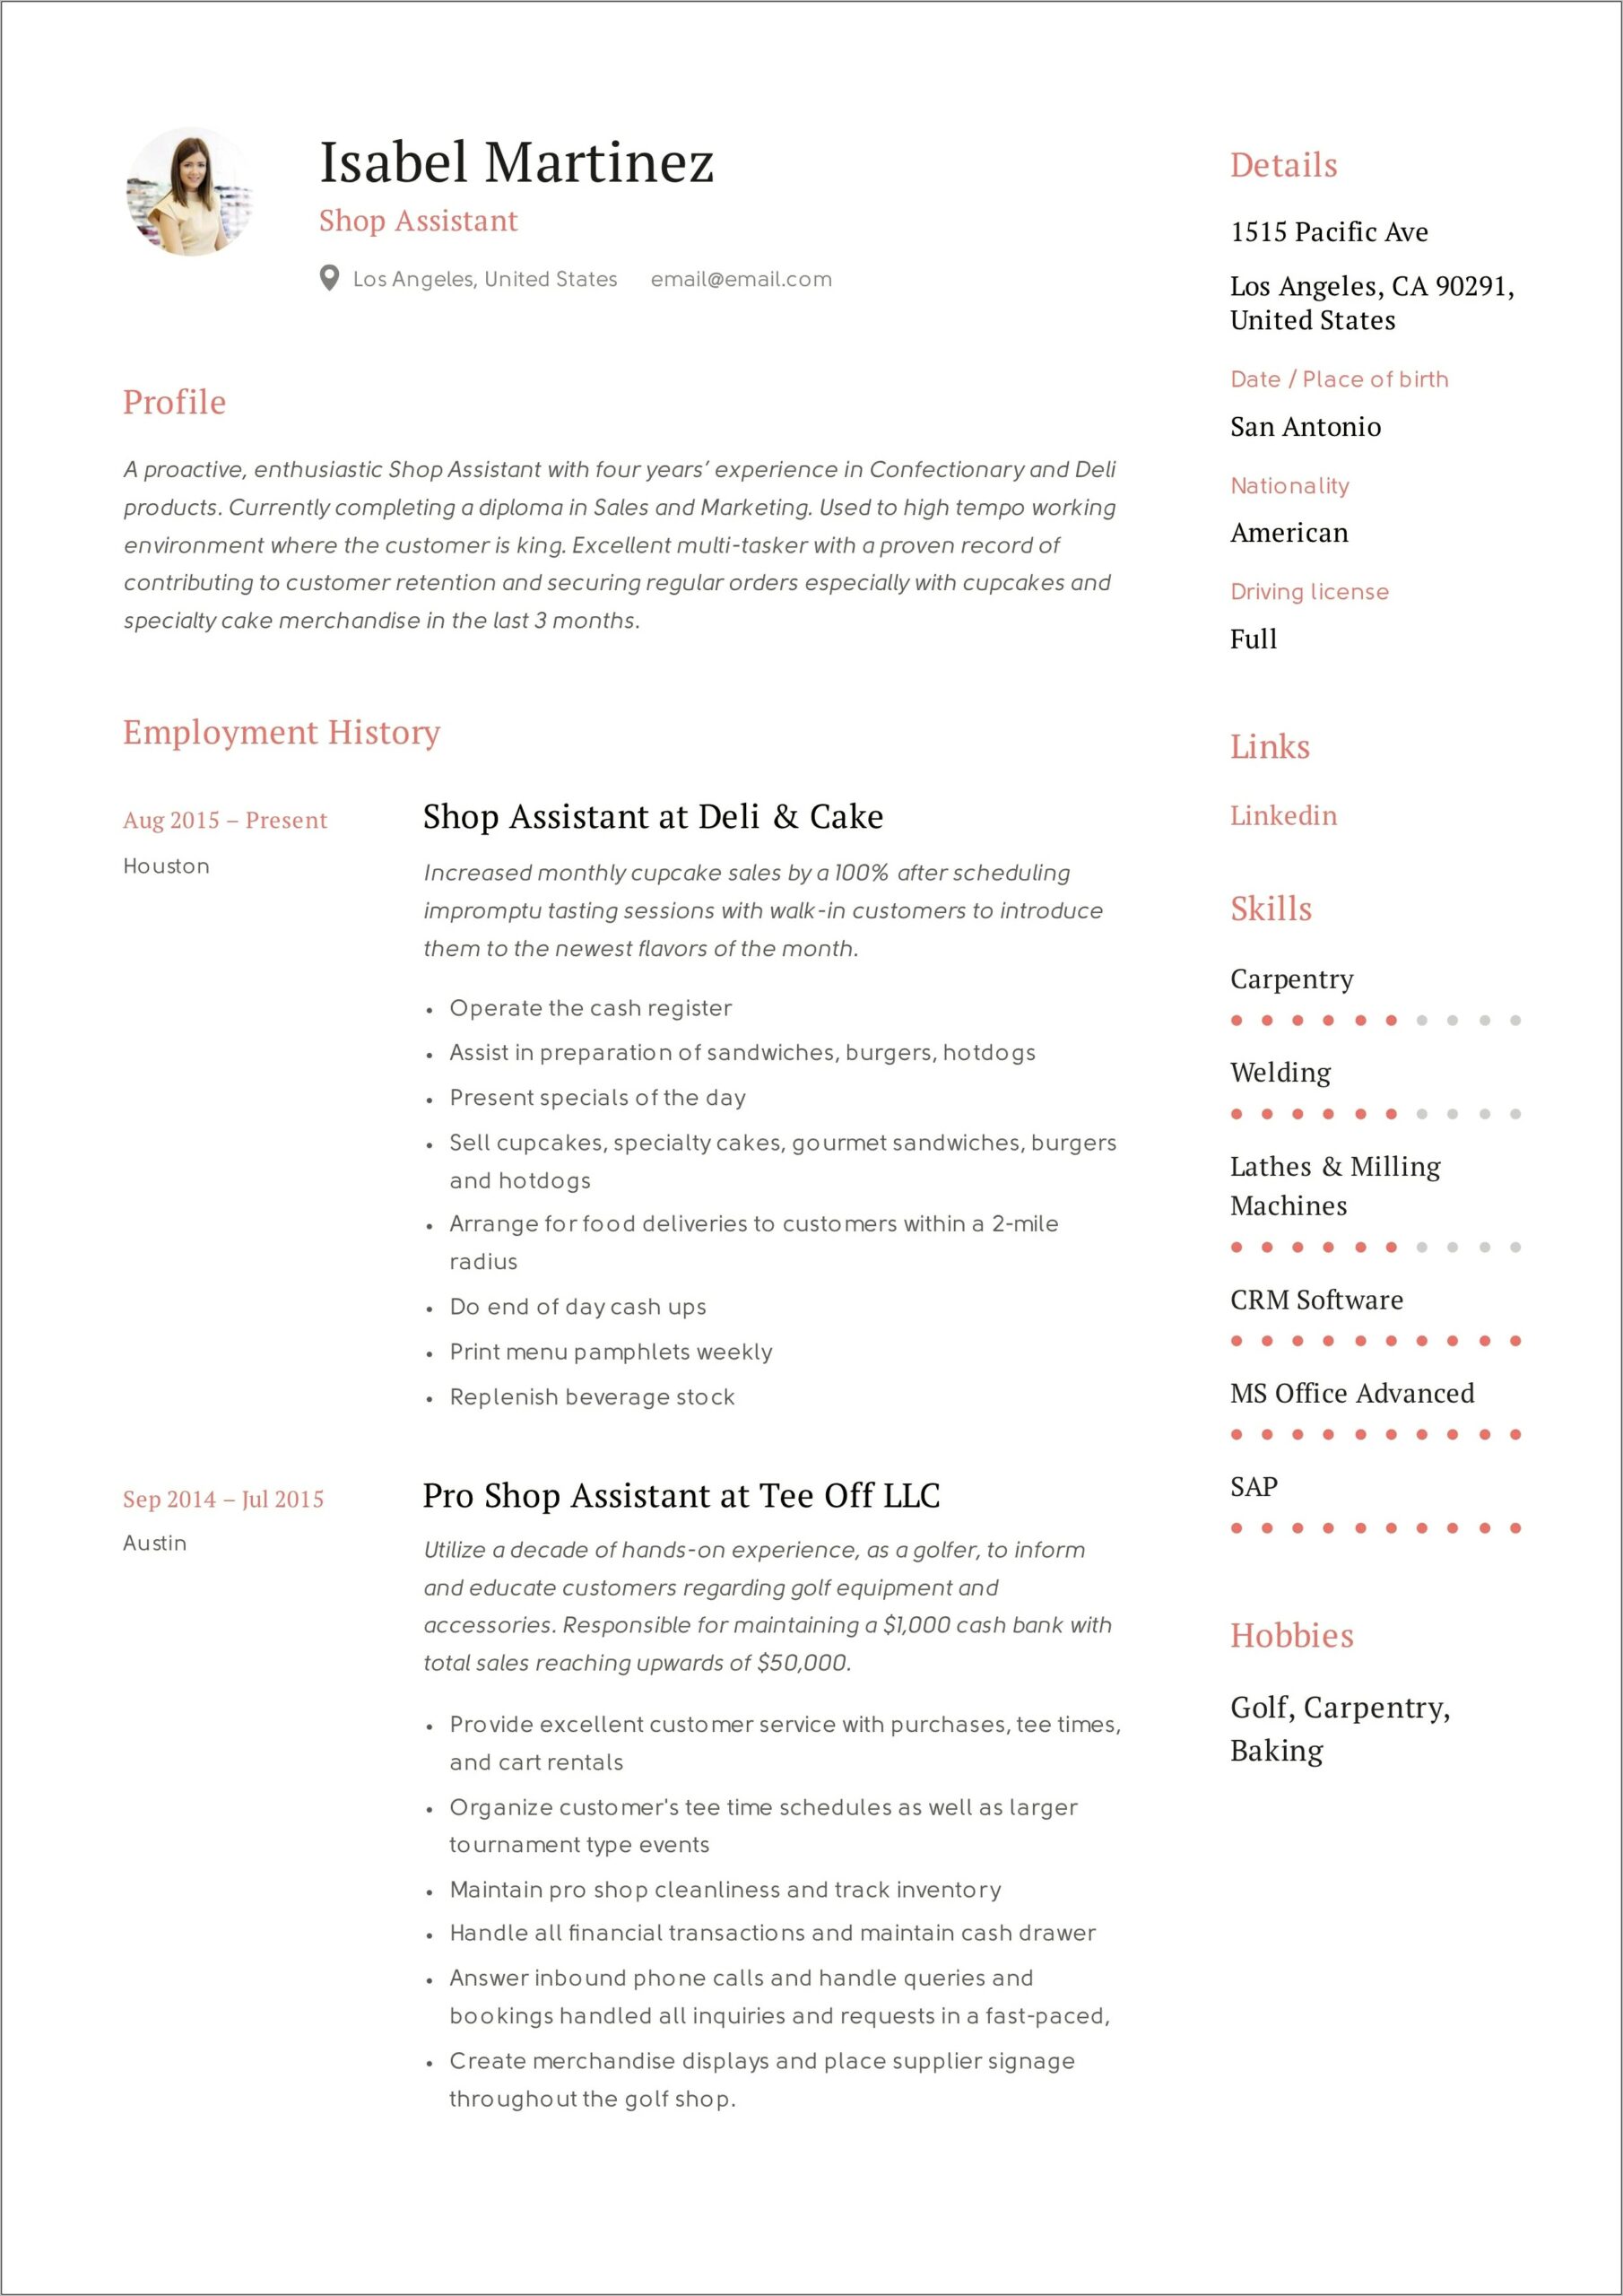 Resume Objective For Clothing Store